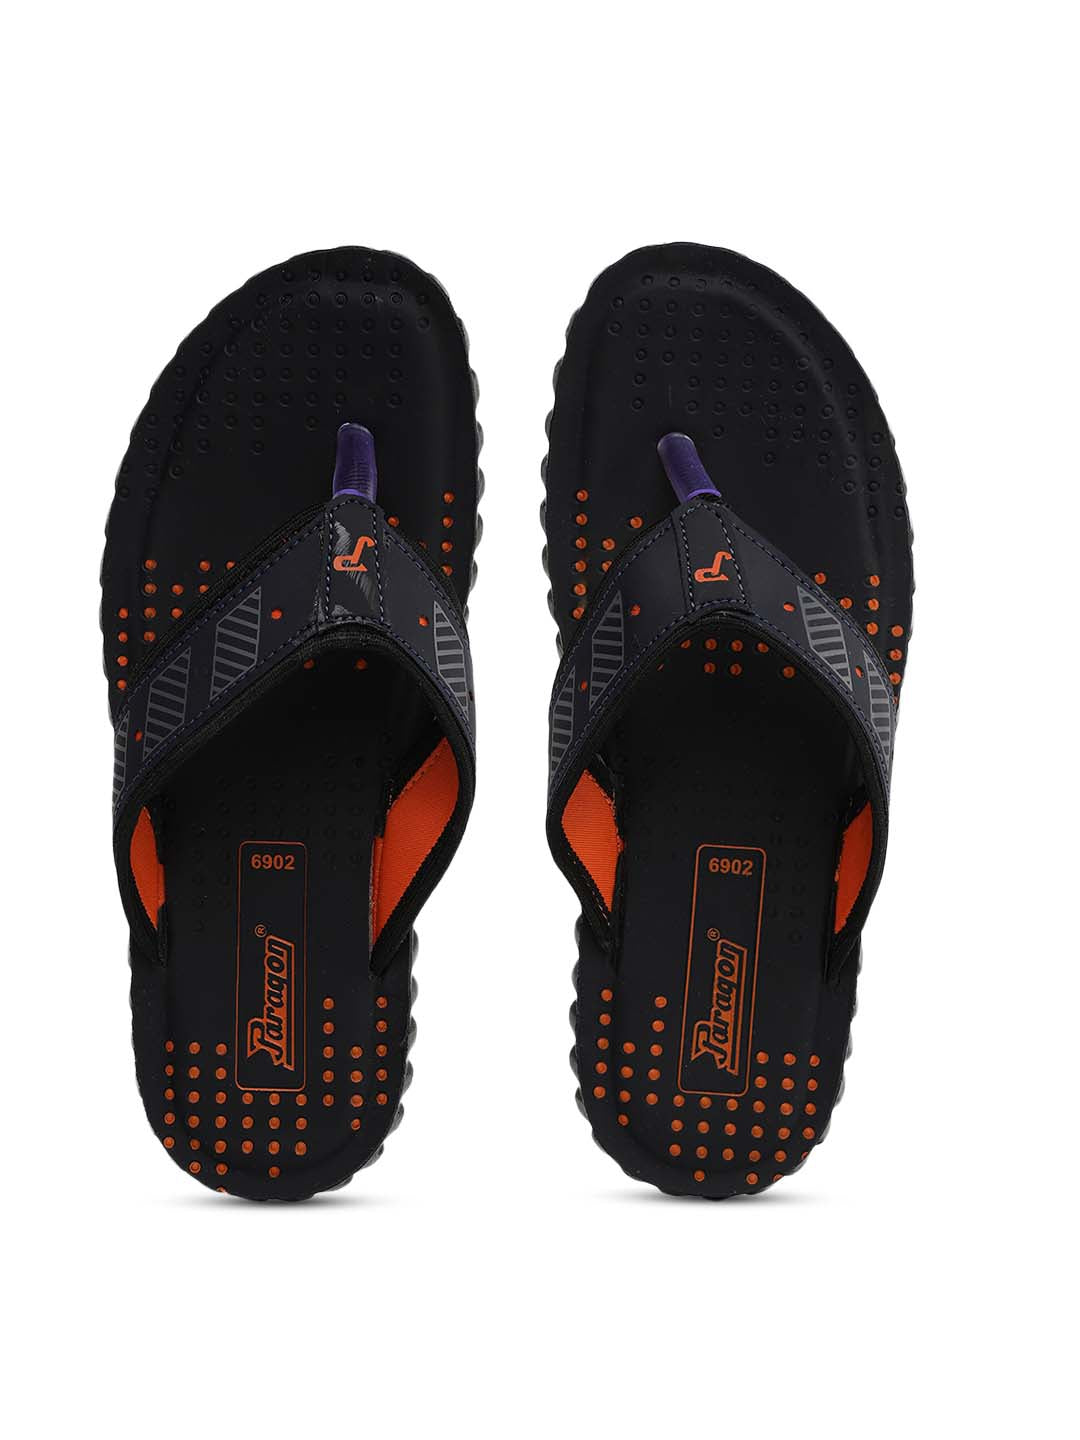 Paragon PU6902G Men Stylish Lightweight Flipflops | Comfortable with Anti skid soles | Casual &amp; Trendy Slippers | Indoor &amp; Outdoor